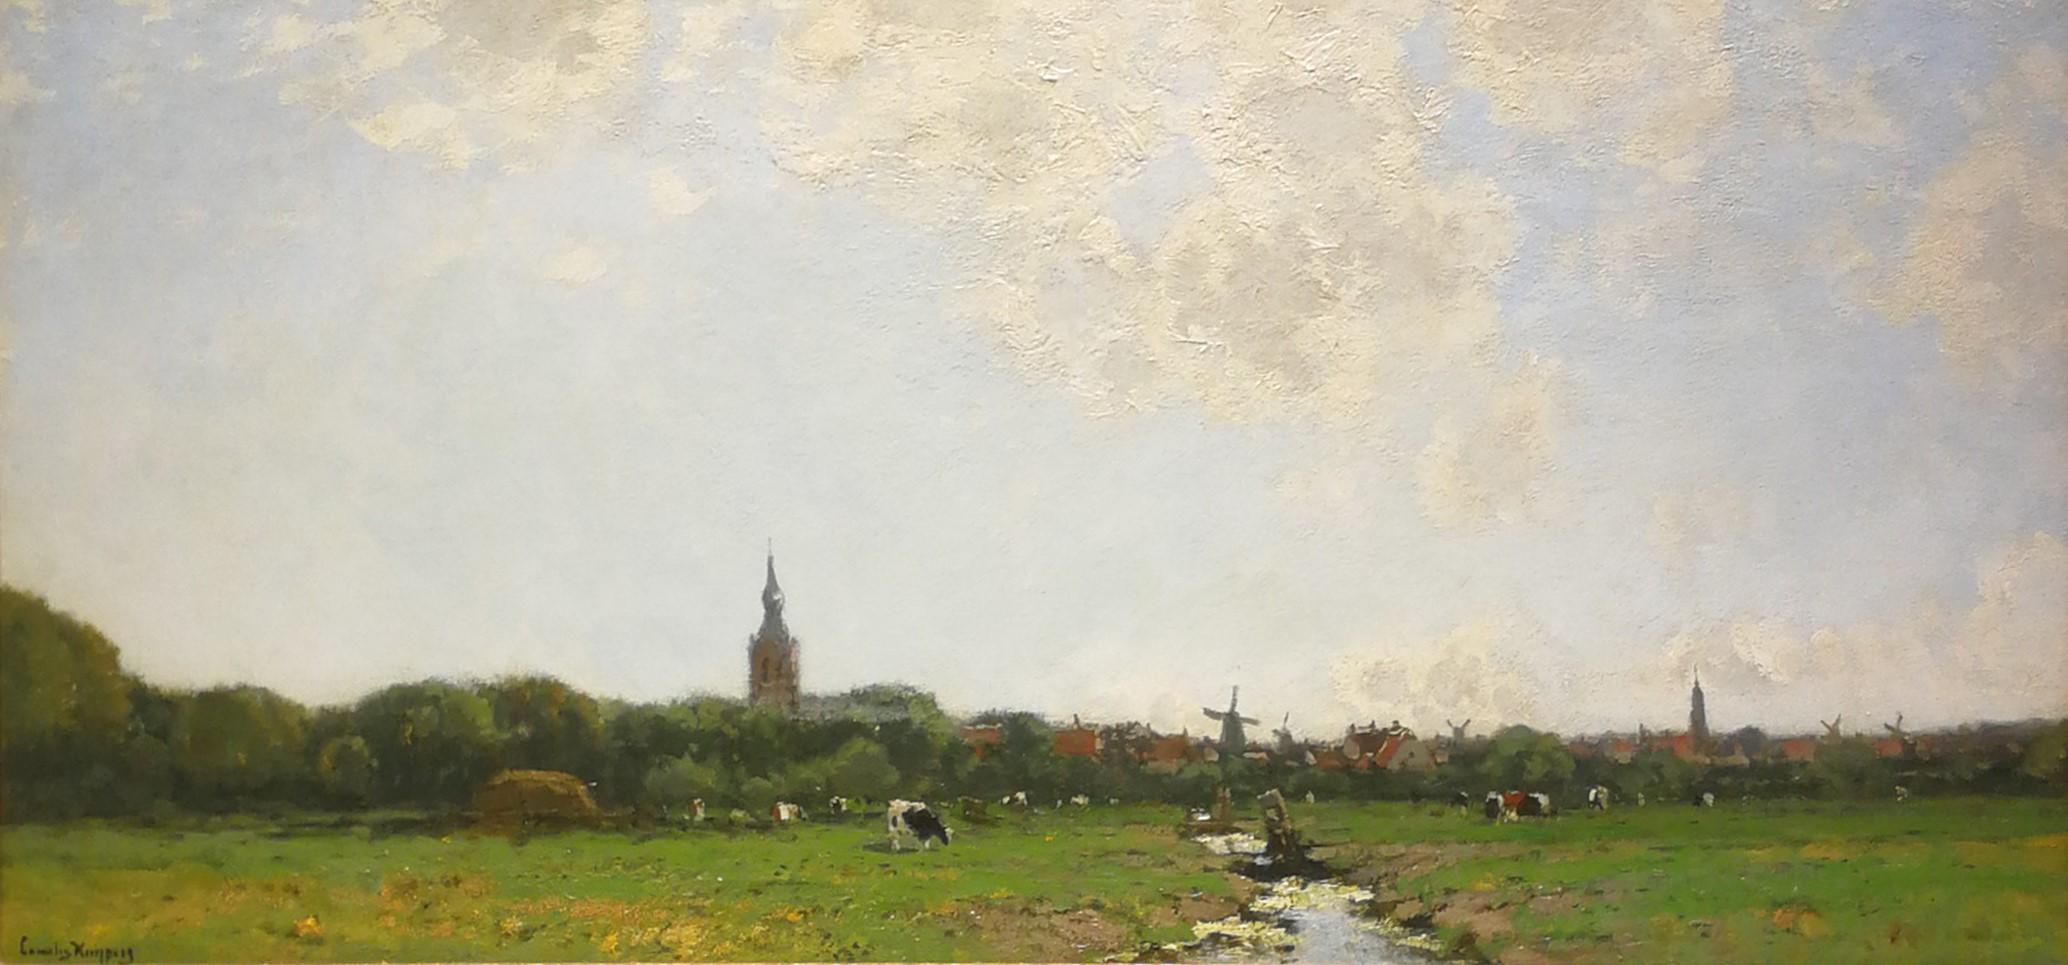 Dutch, 1864 – 1932

Cornelis Kuijpers was born on February 20, 1864 in Gorinchem.
He lived and worked in Amsterdam, The Hague and Rijswijk, among others.
He was taught by his father JCE Kuijpers and, in addition to oil paintings, made many drawings